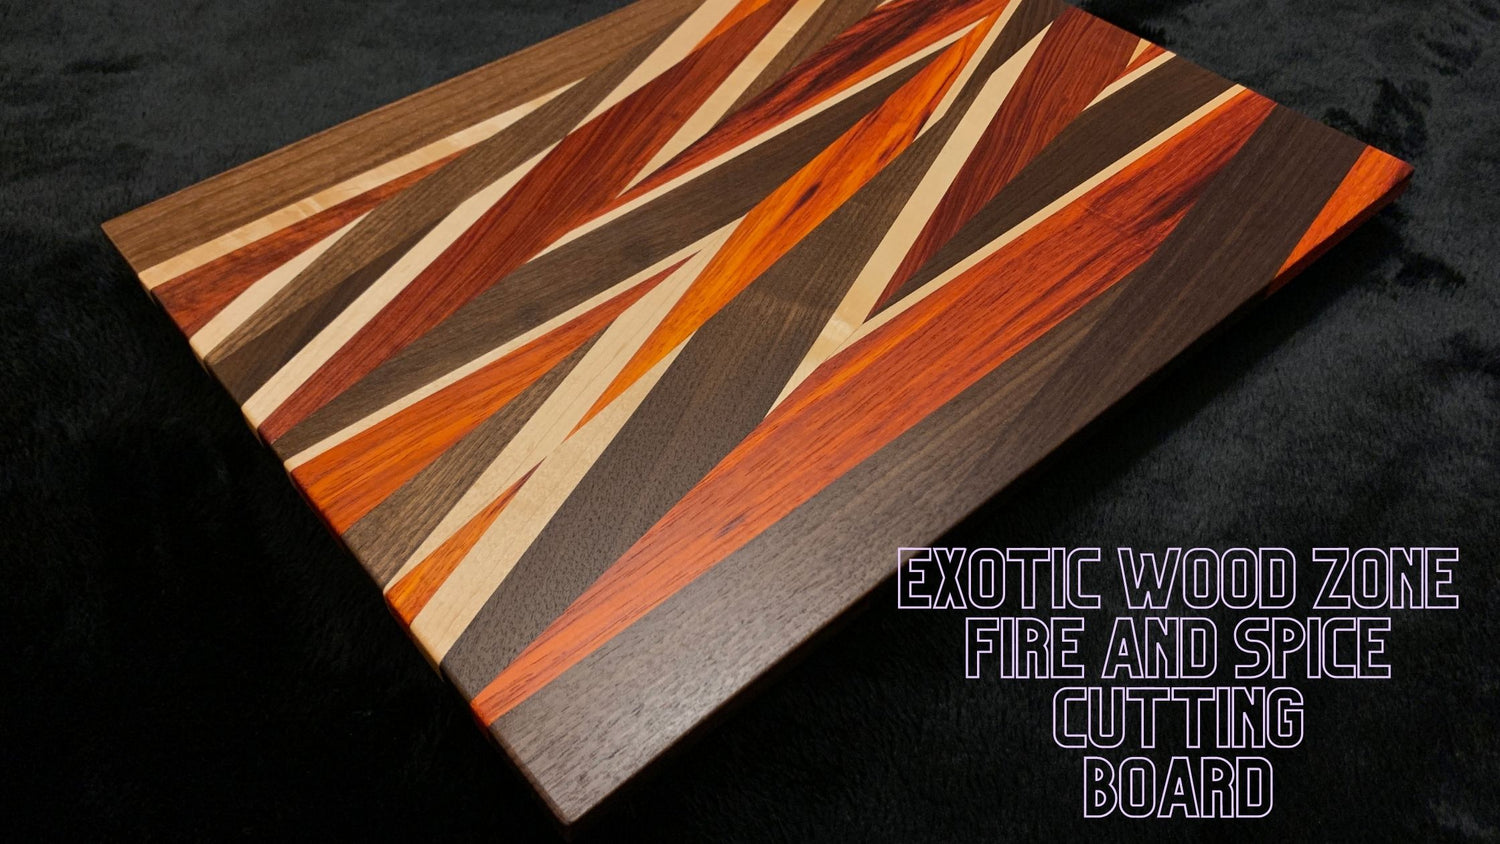 Exotic Wood Zone Cutting Board by Casey Reeves